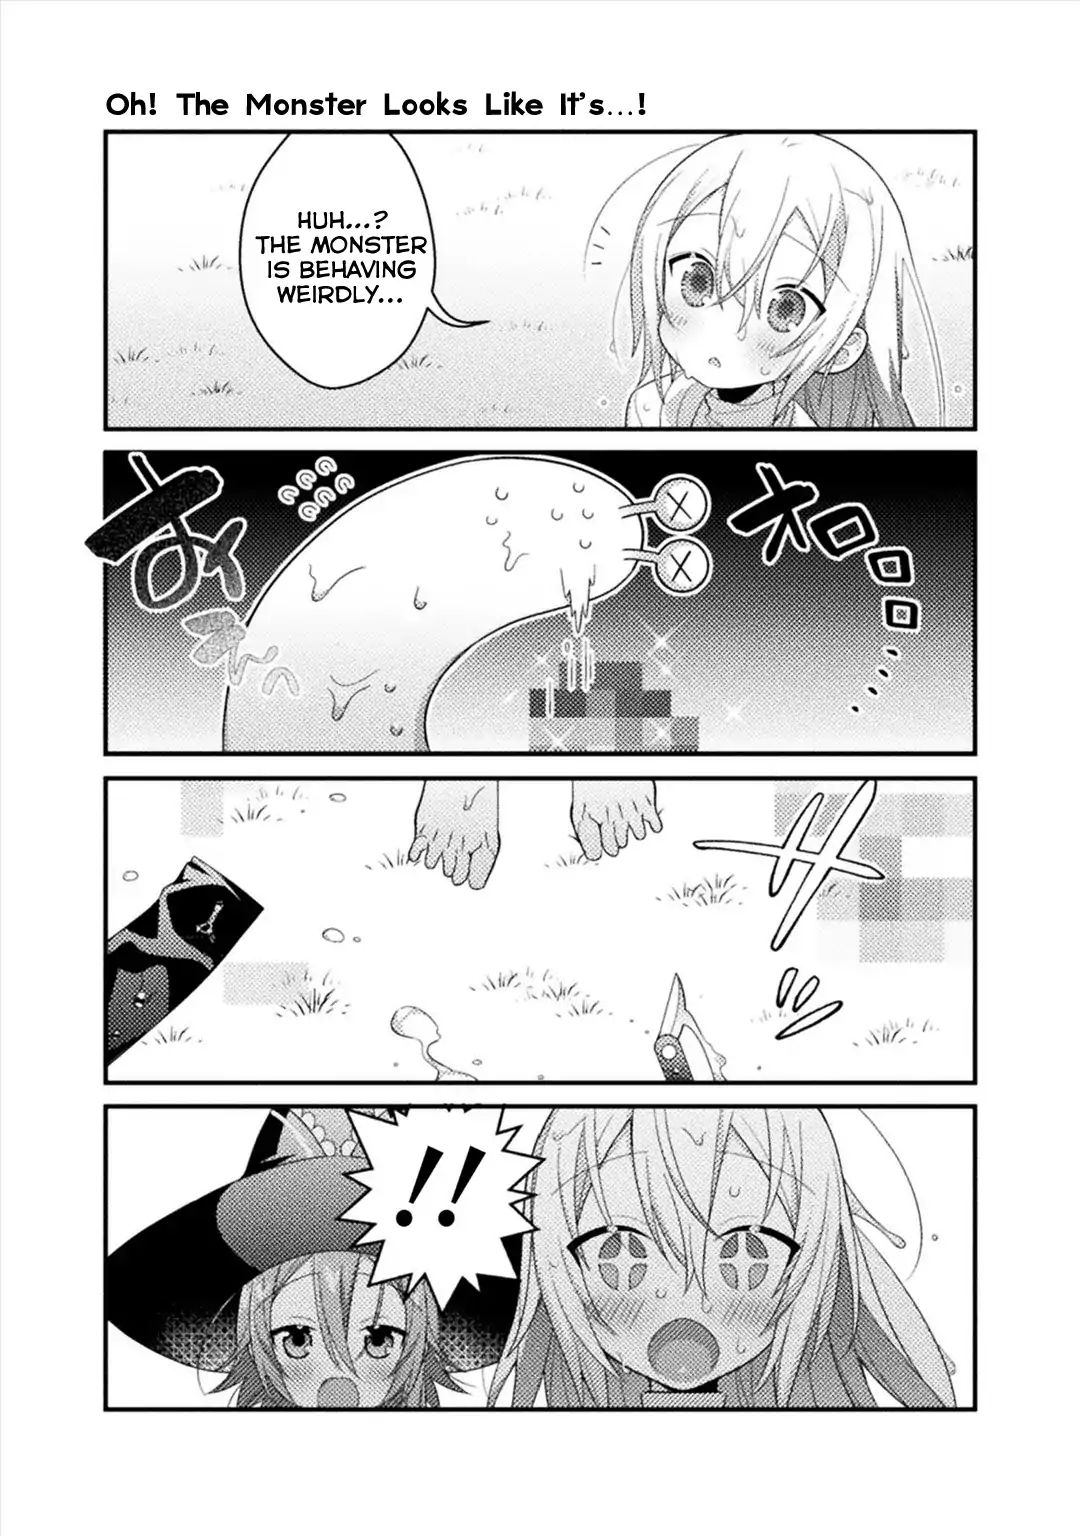 After Reincarnation, My Party Was Full Of Traps, But I'm Not A Shotacon! - 5 page 6